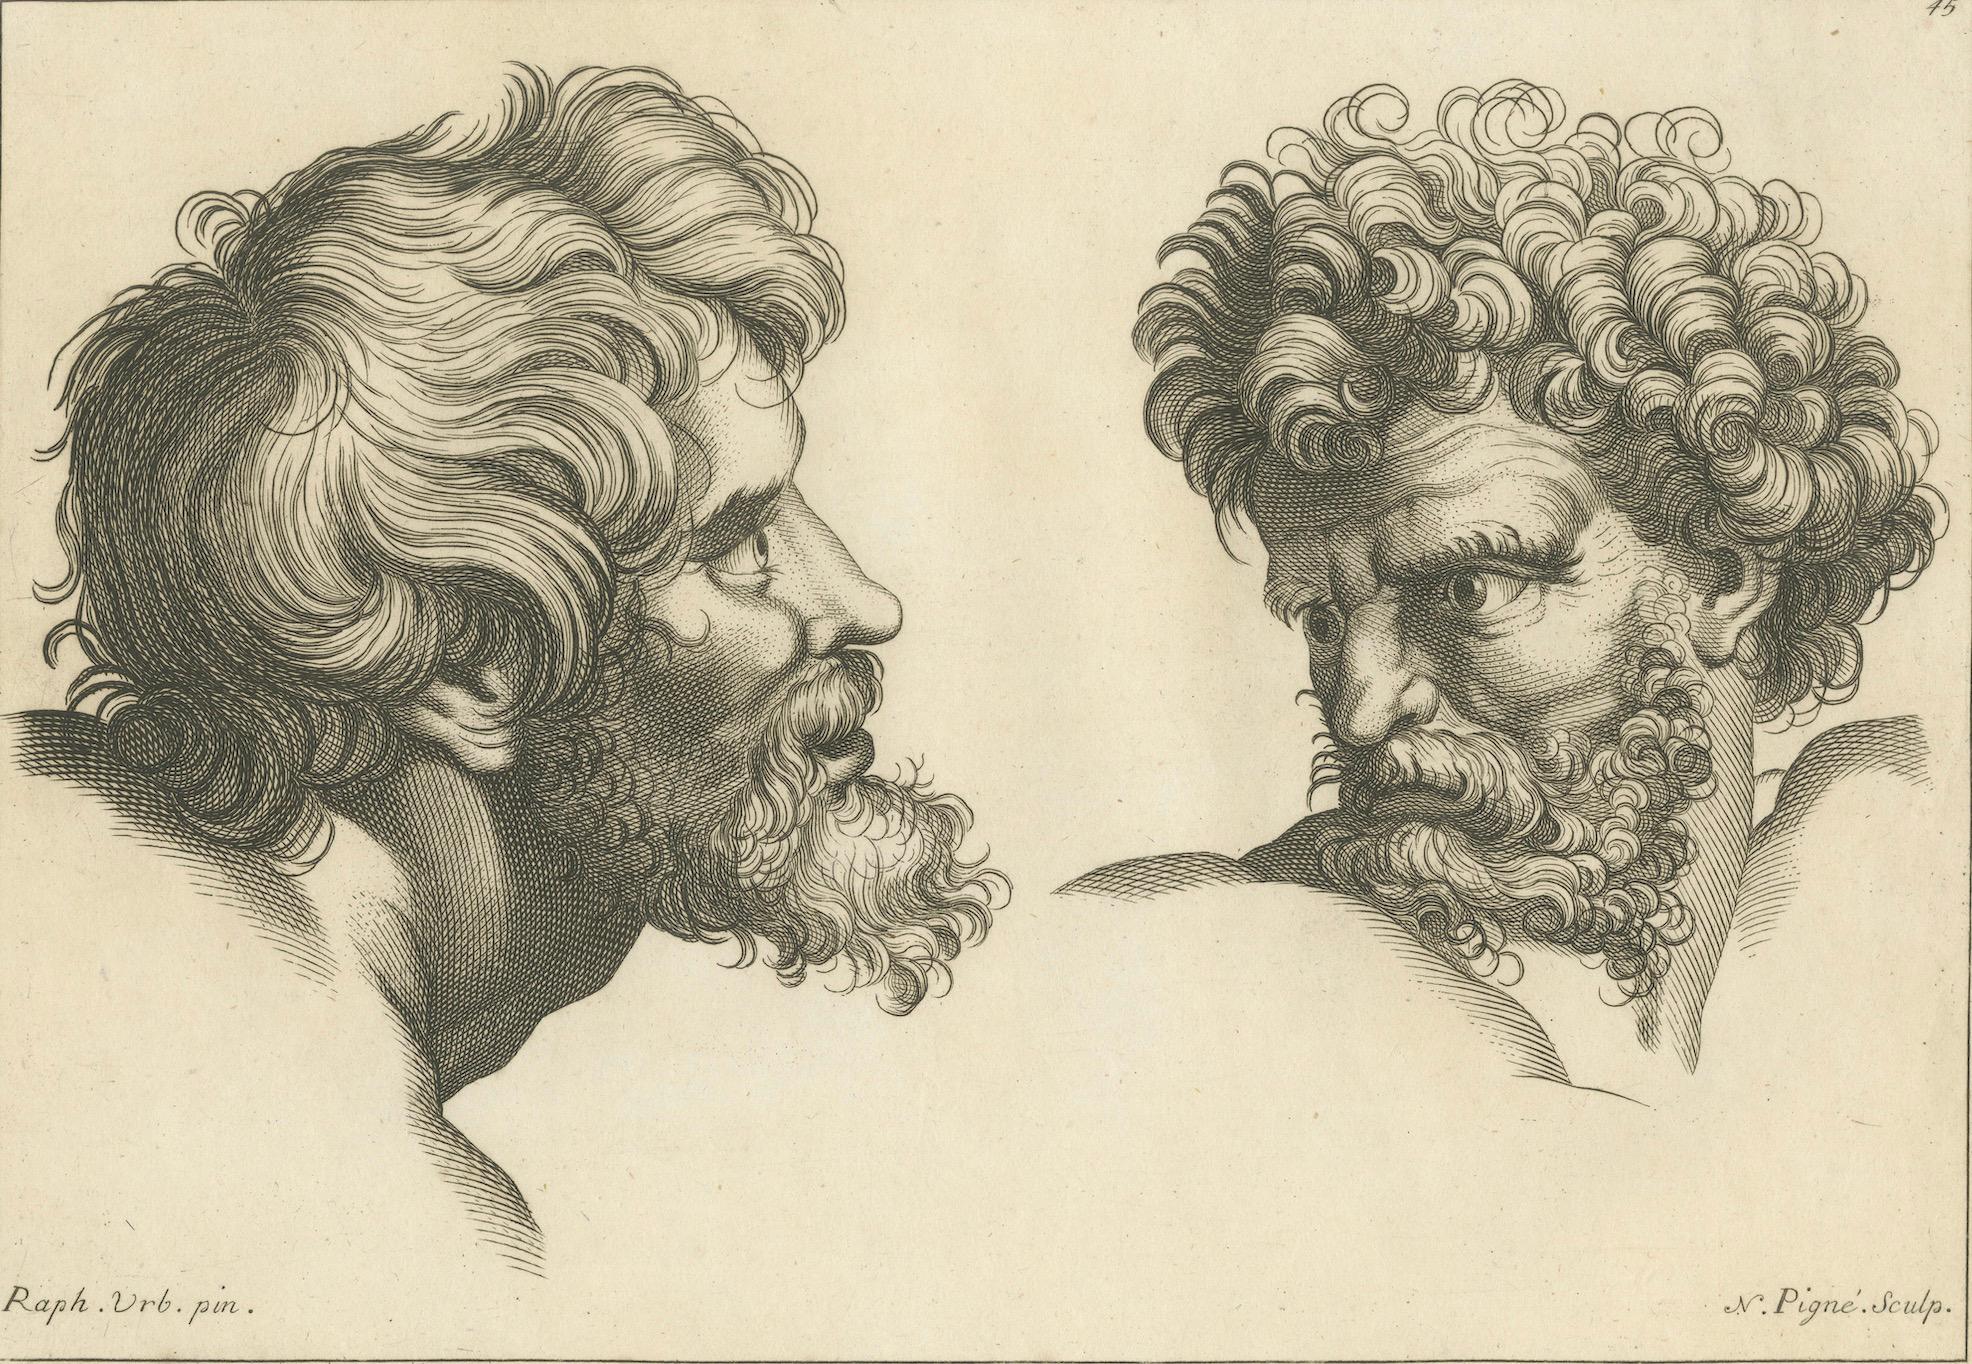 Mid-18th Century Visages of Virtue and Vigor: Raphael to Pigné, 1740 For Sale